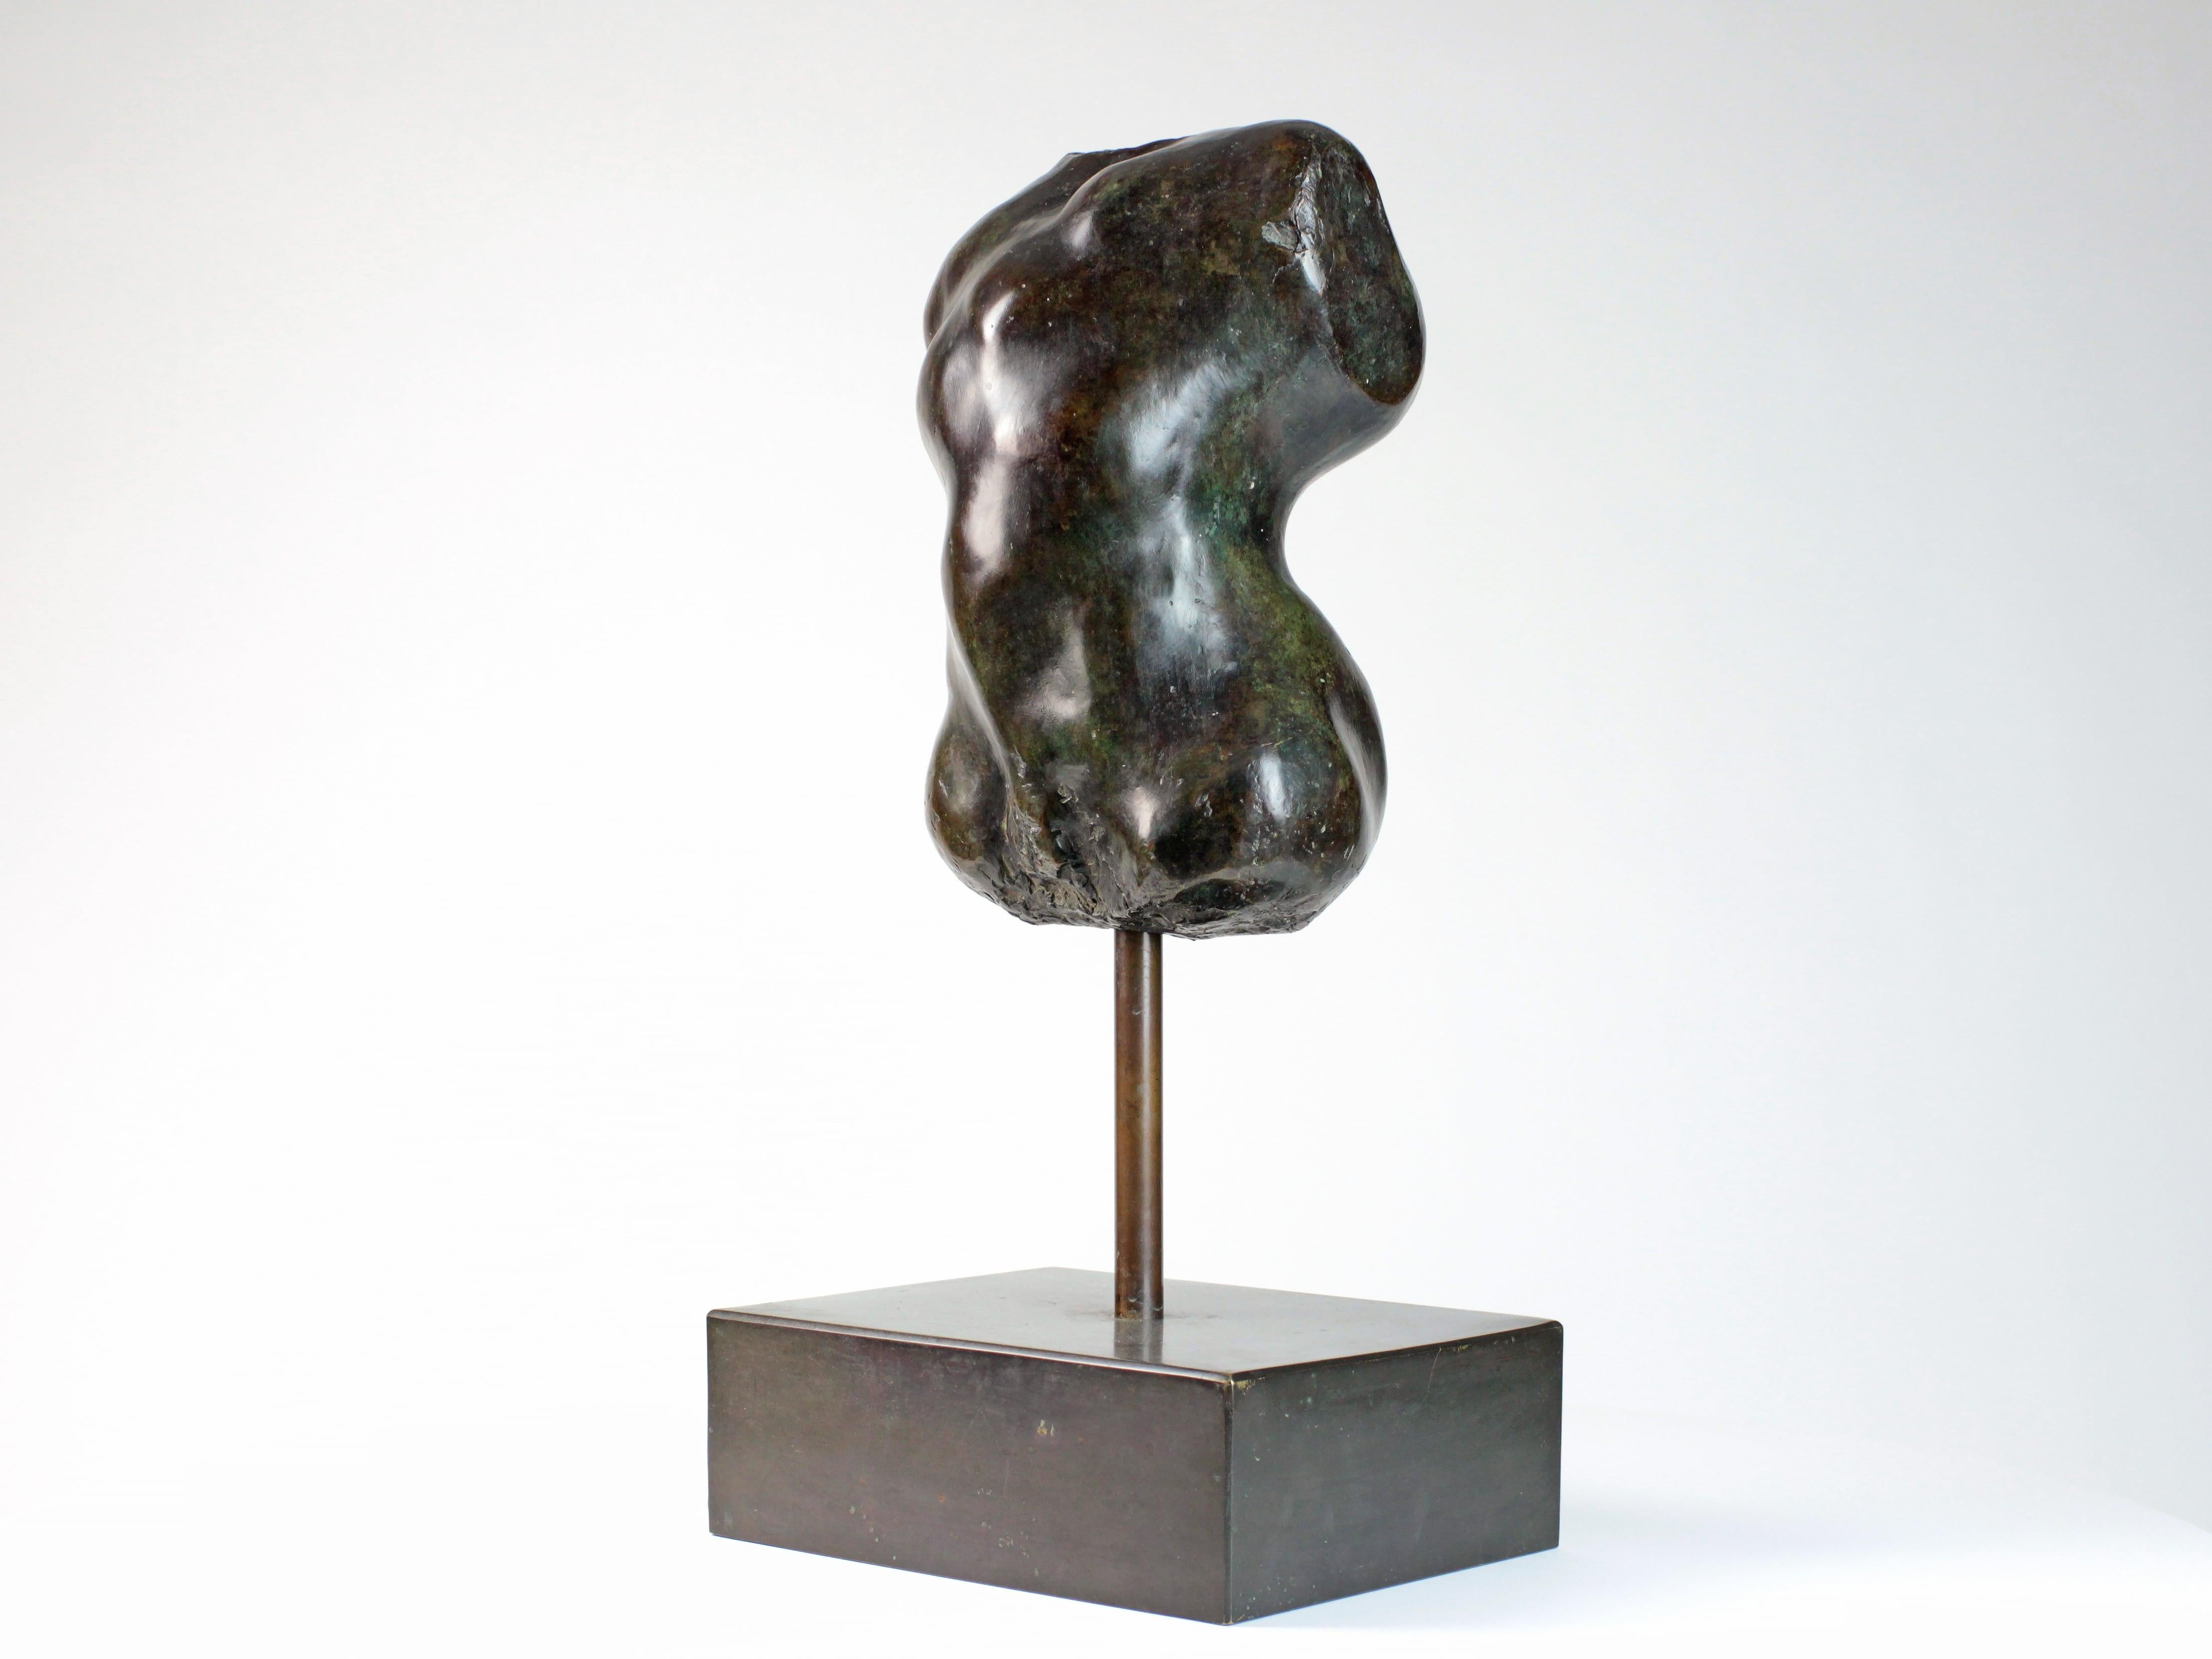 Hermaphrodite I is a bronze sculpture by French contemporary artist Yann Guillon. 40 cm × 25 cm × 25 cm.
Yann Guillon focuses his work on the human body, using an expressionist approach to convey alternately strength or sensuality. He often brings